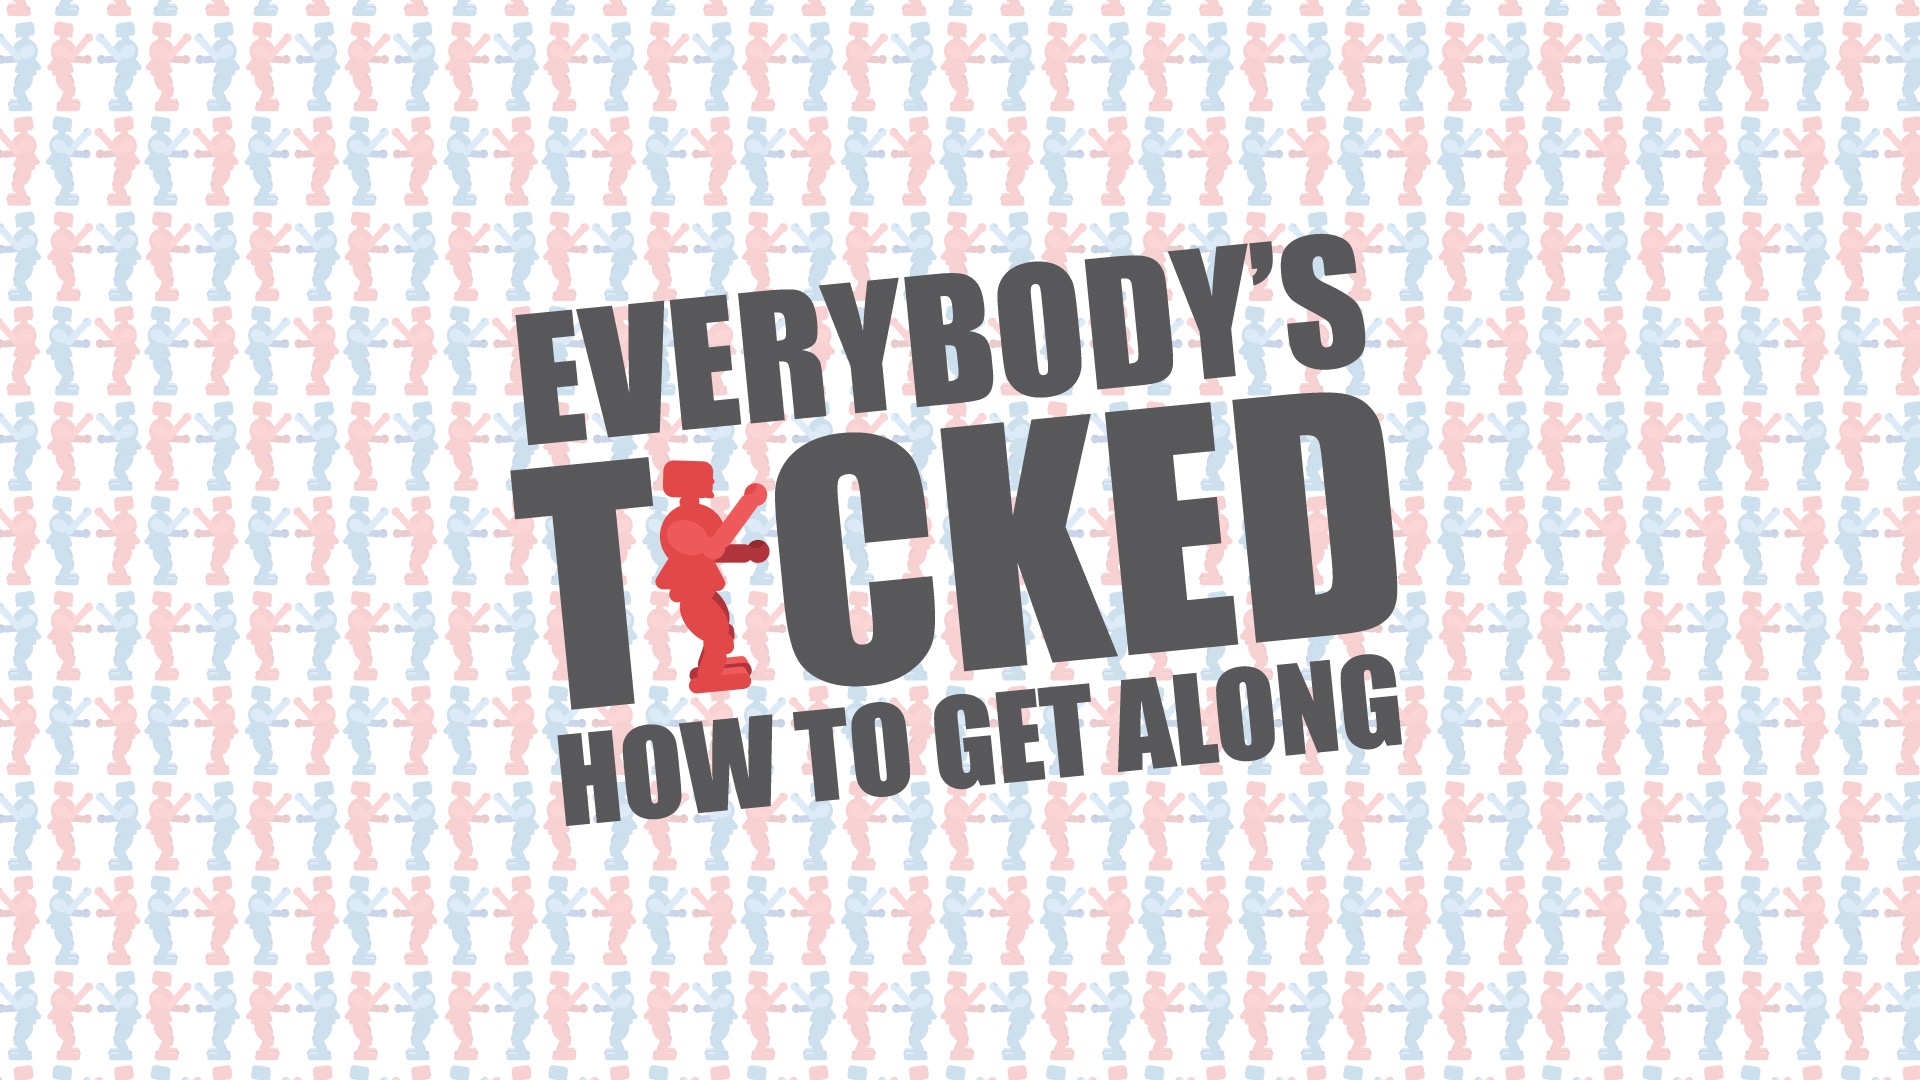 Everybody's Ticked: How To Get Along - Part III